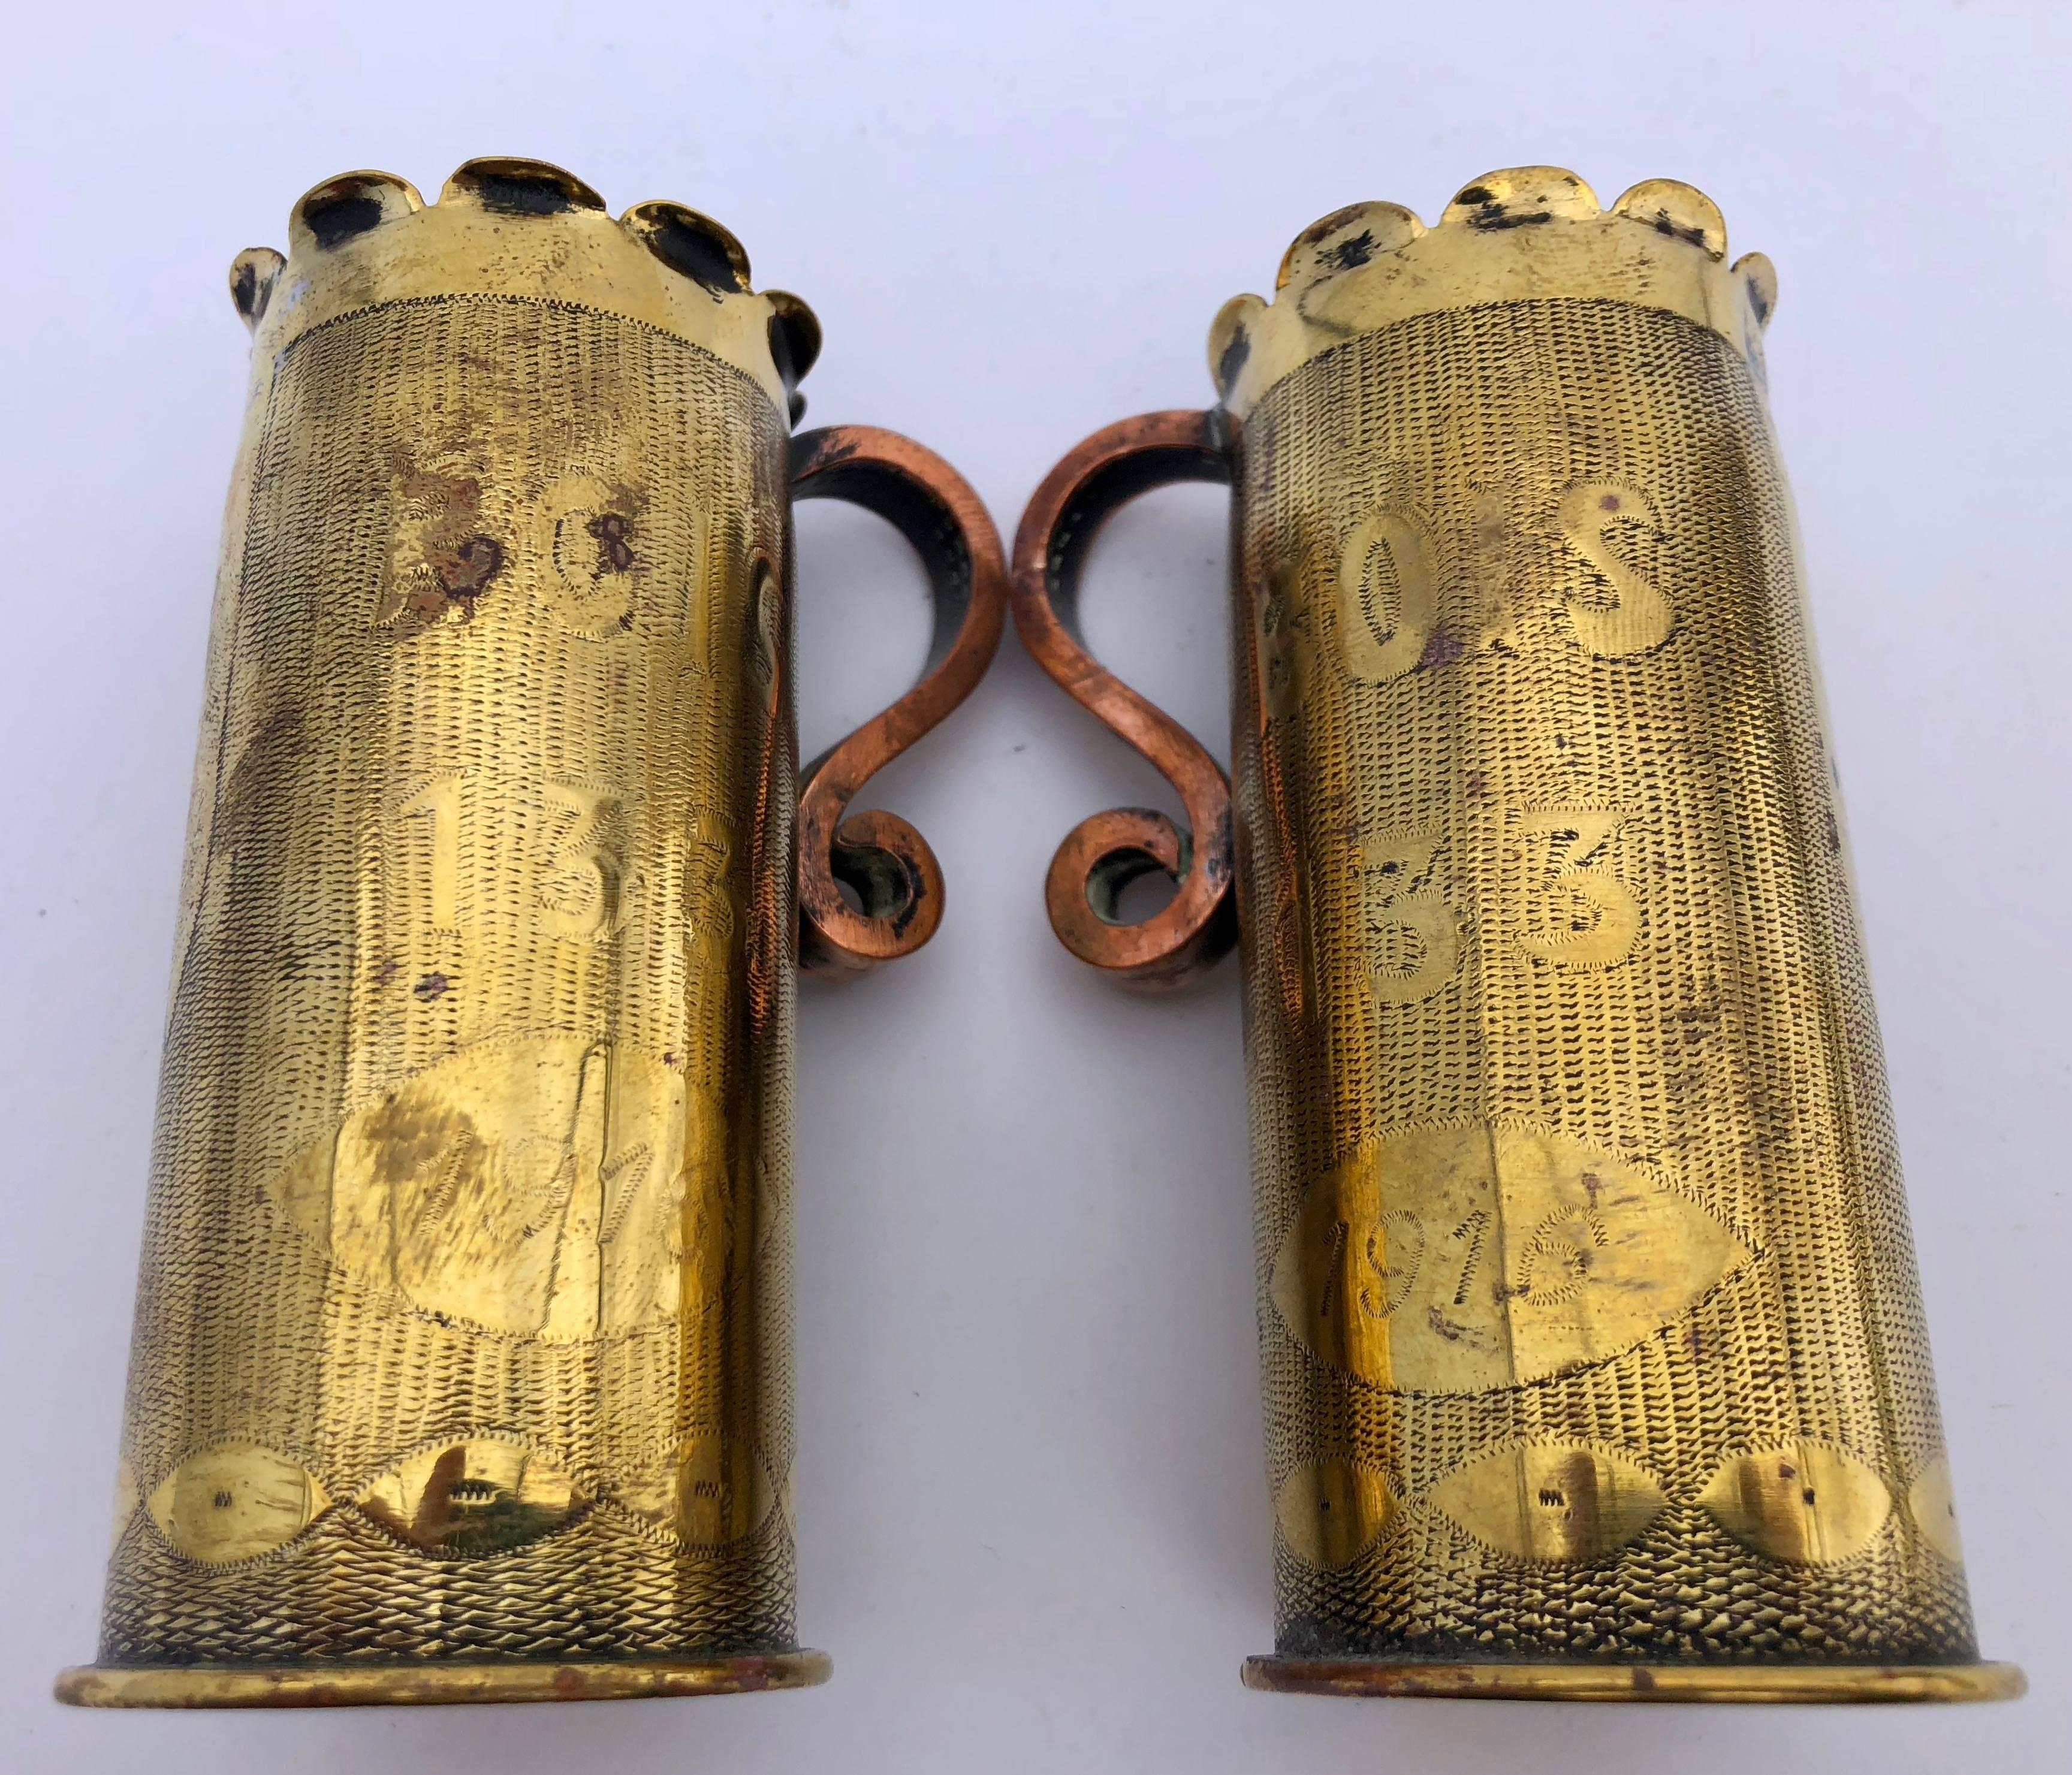 These are two beautiful French First World War brass shell case mugs with scrolled copper handles and scalloped tops. They are inscribed 